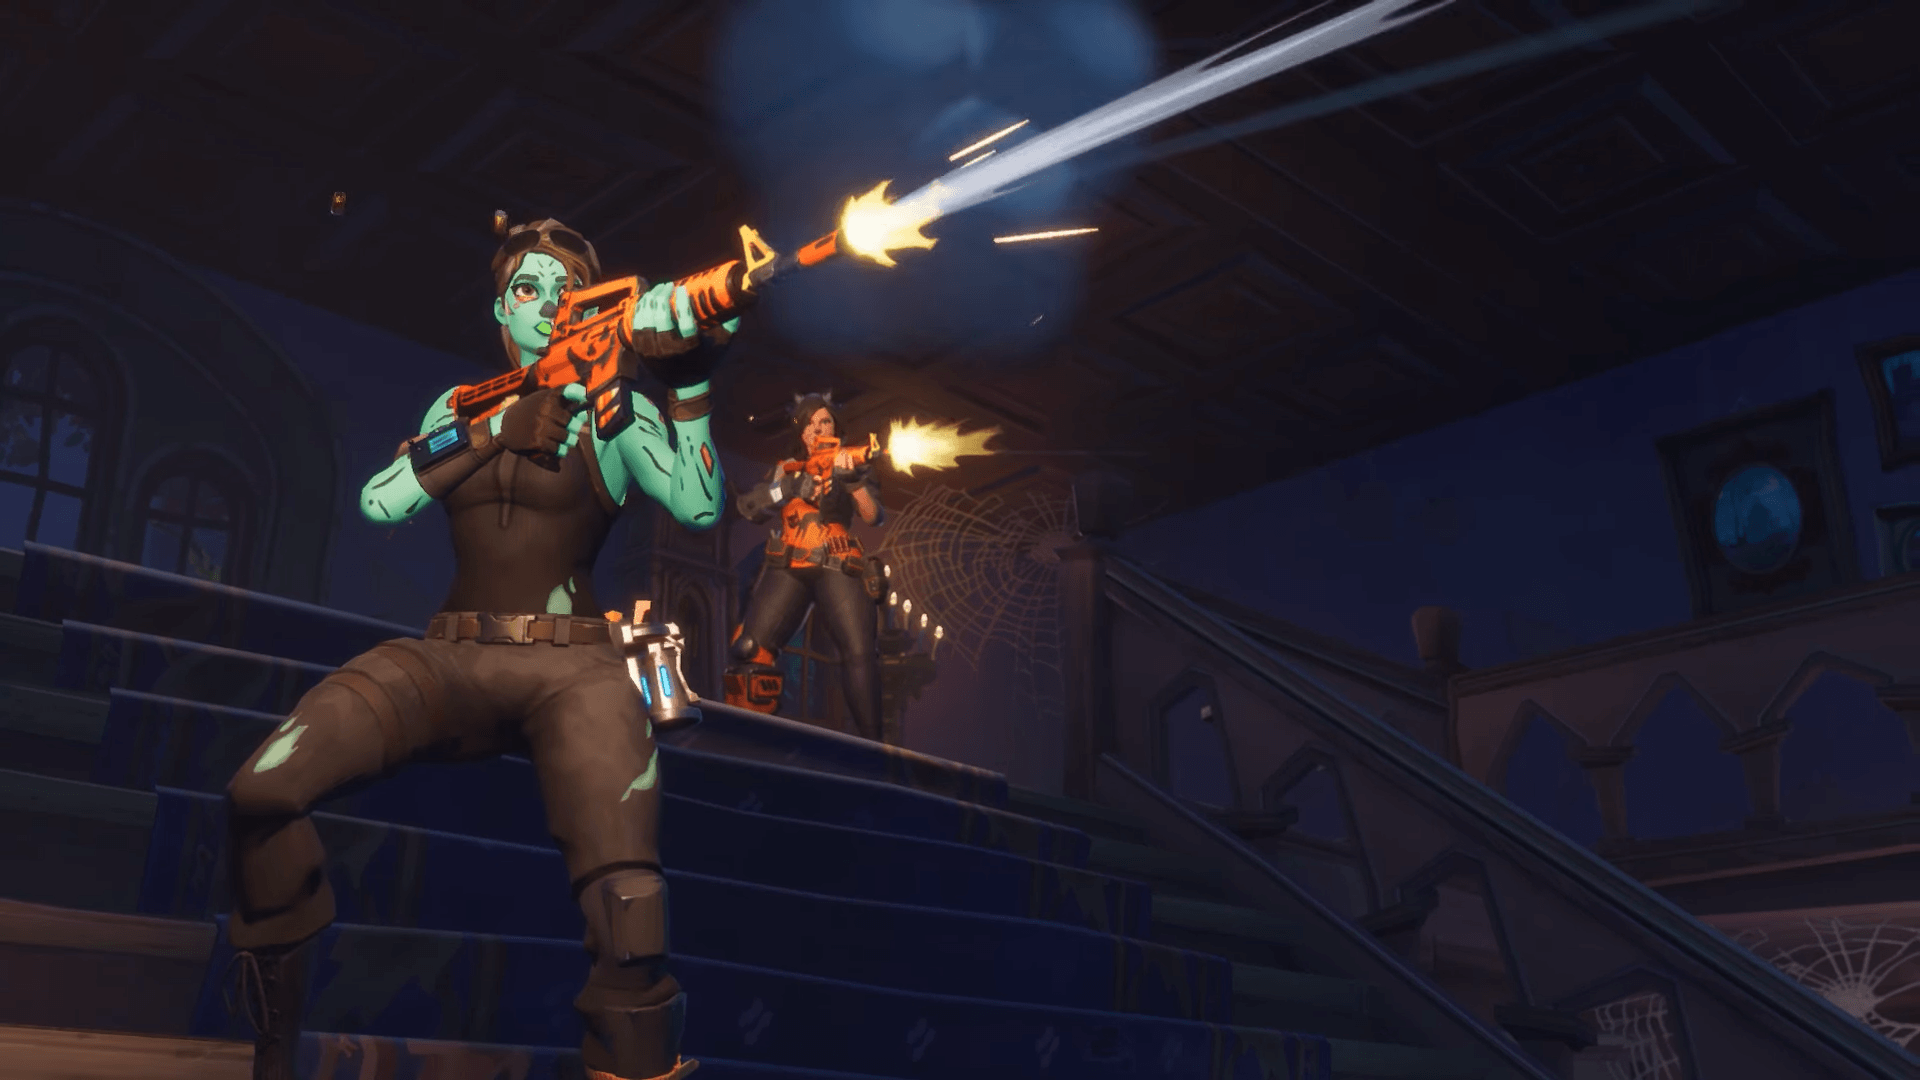 You can use Fortnite Battle Royale's Halloween rocket launcher to